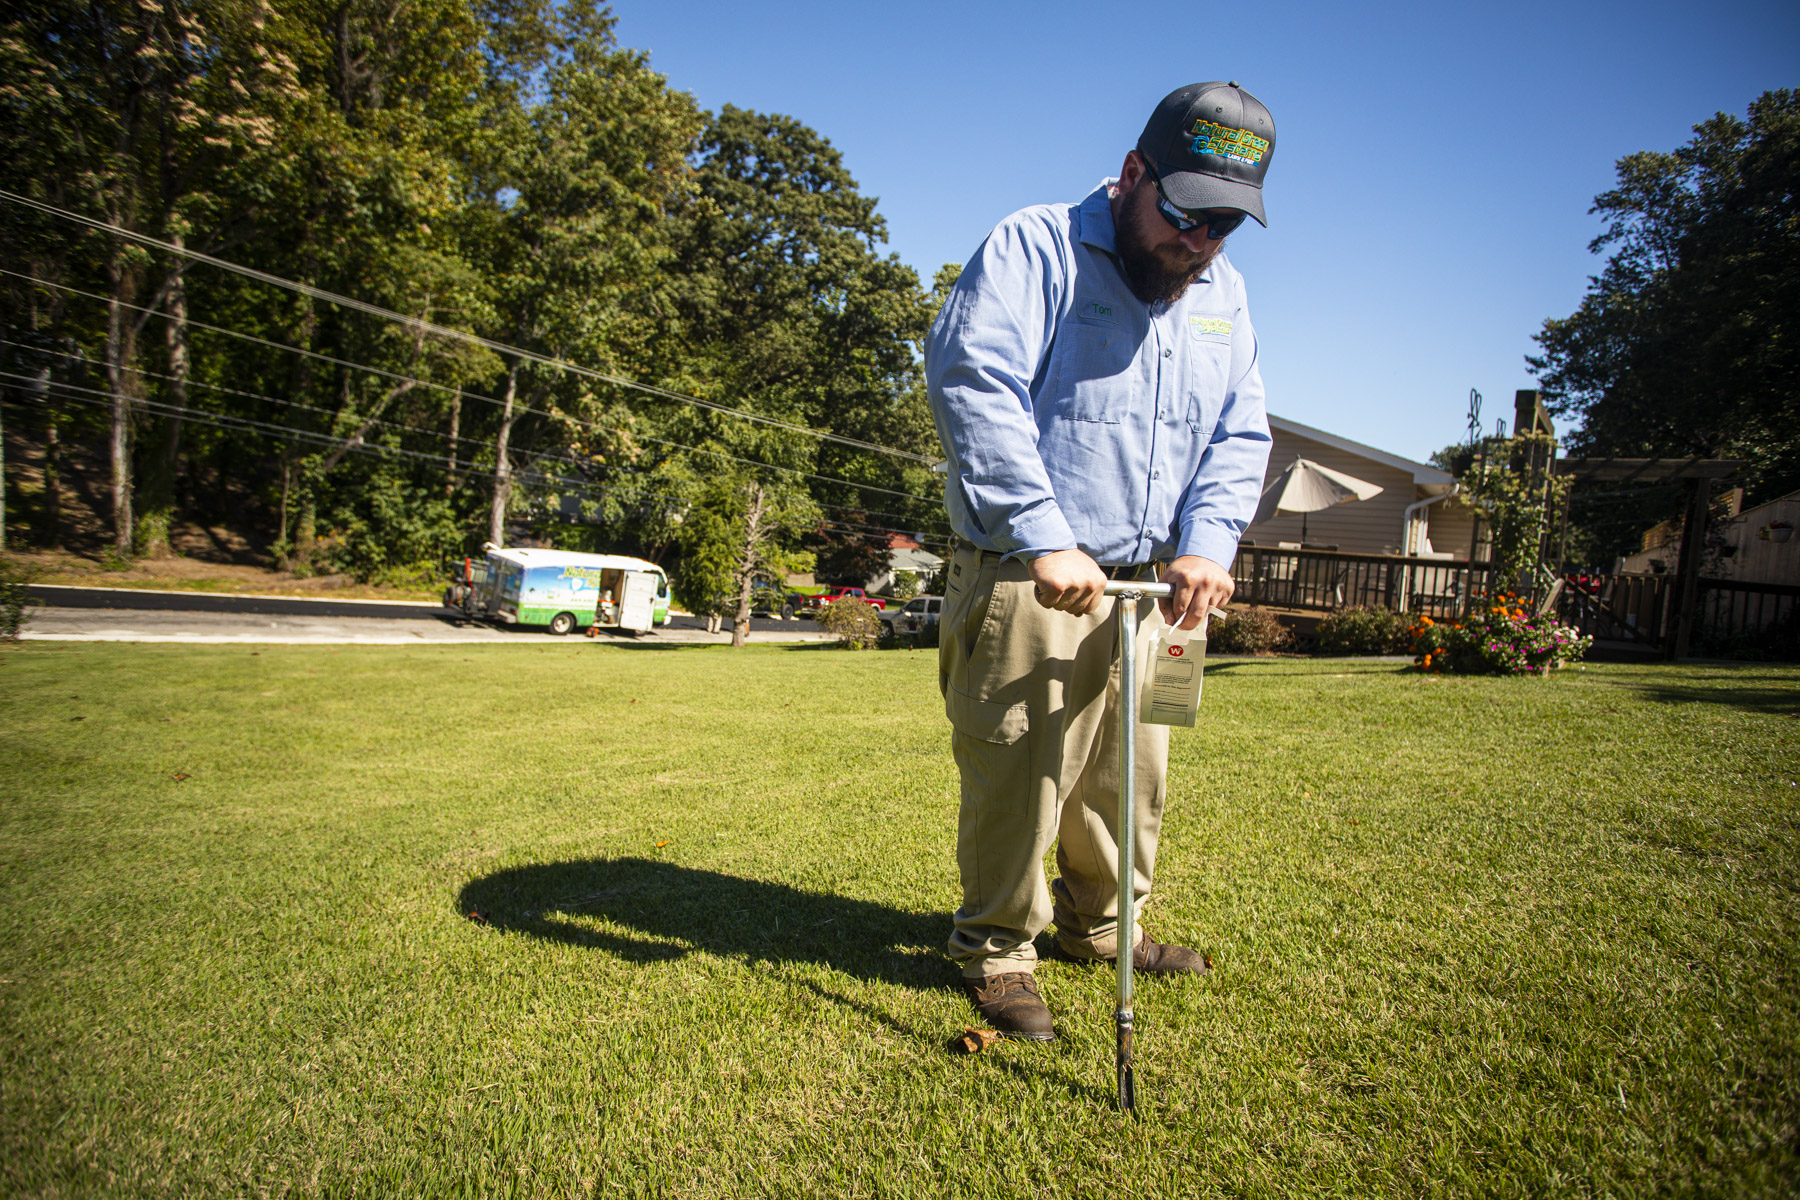 lawn care expert performs soil test